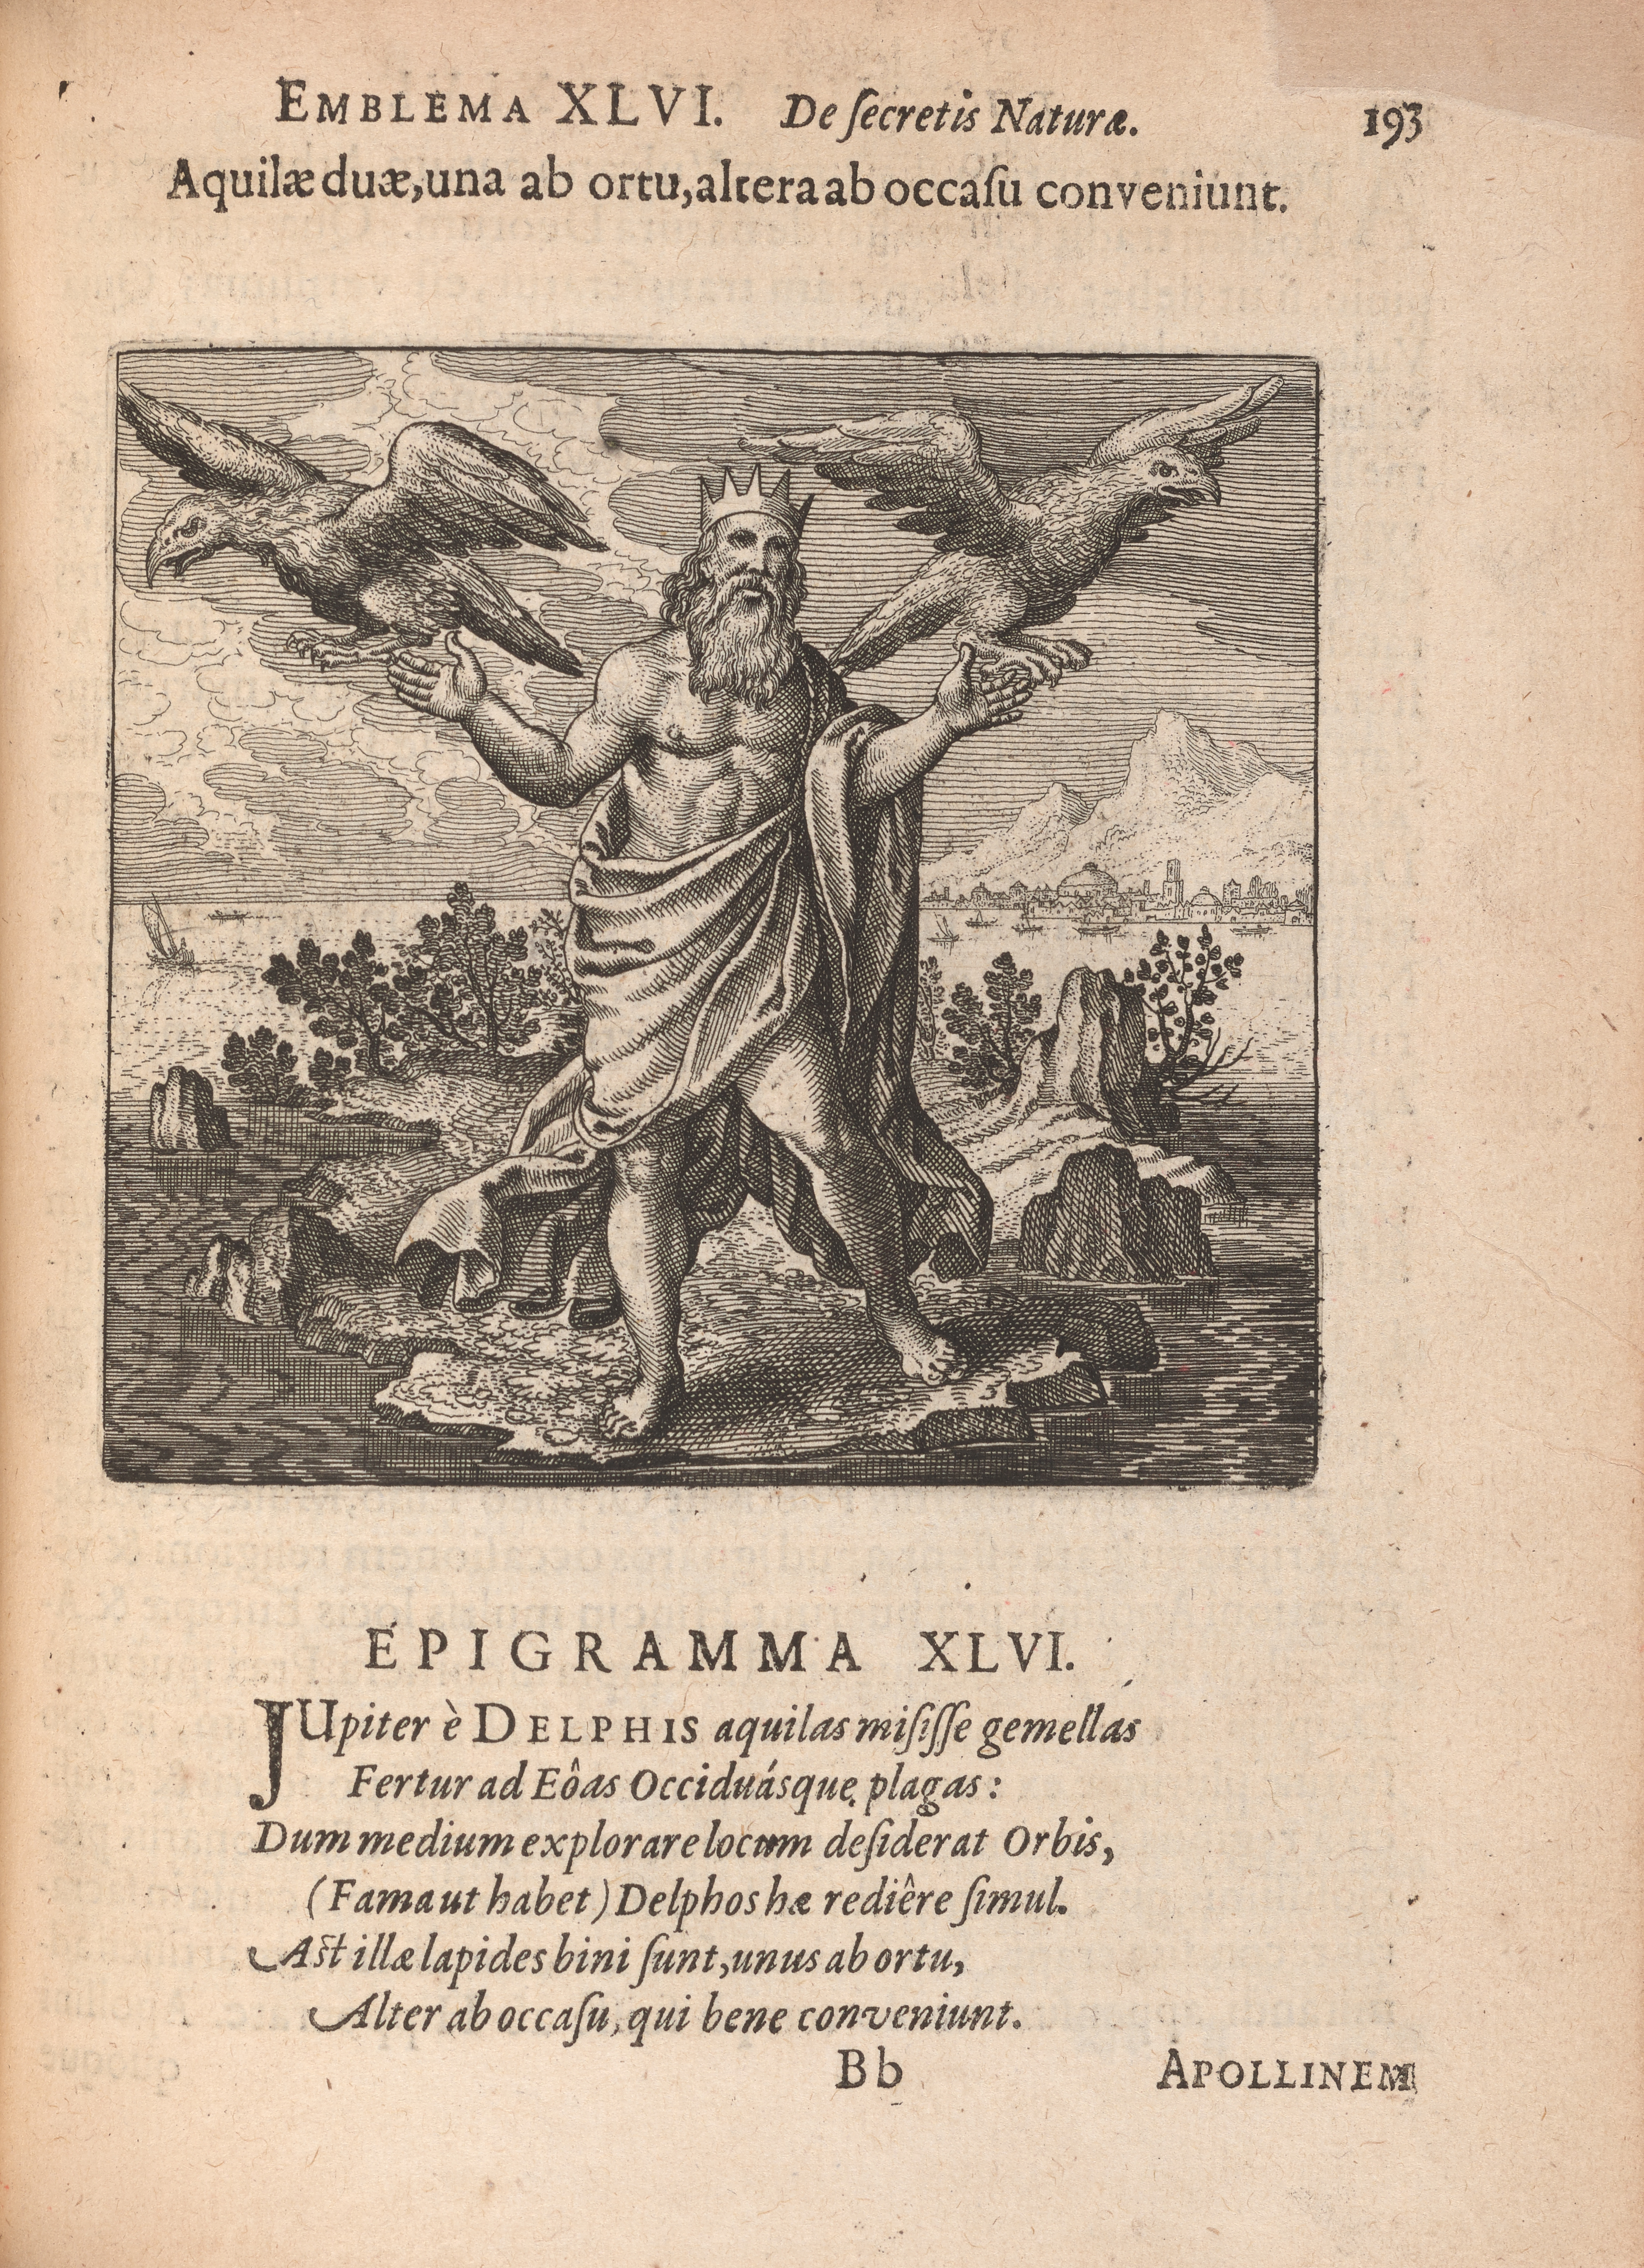 The second page of emblem 46 from Atalanta fugiens shows a motto and epigram in Latin and an image. In the image, a bearded man draped in cloth wearing a crown, understood as Jove, is holding in each hand an eagle with spread wings on a small island in the middle of a lake.